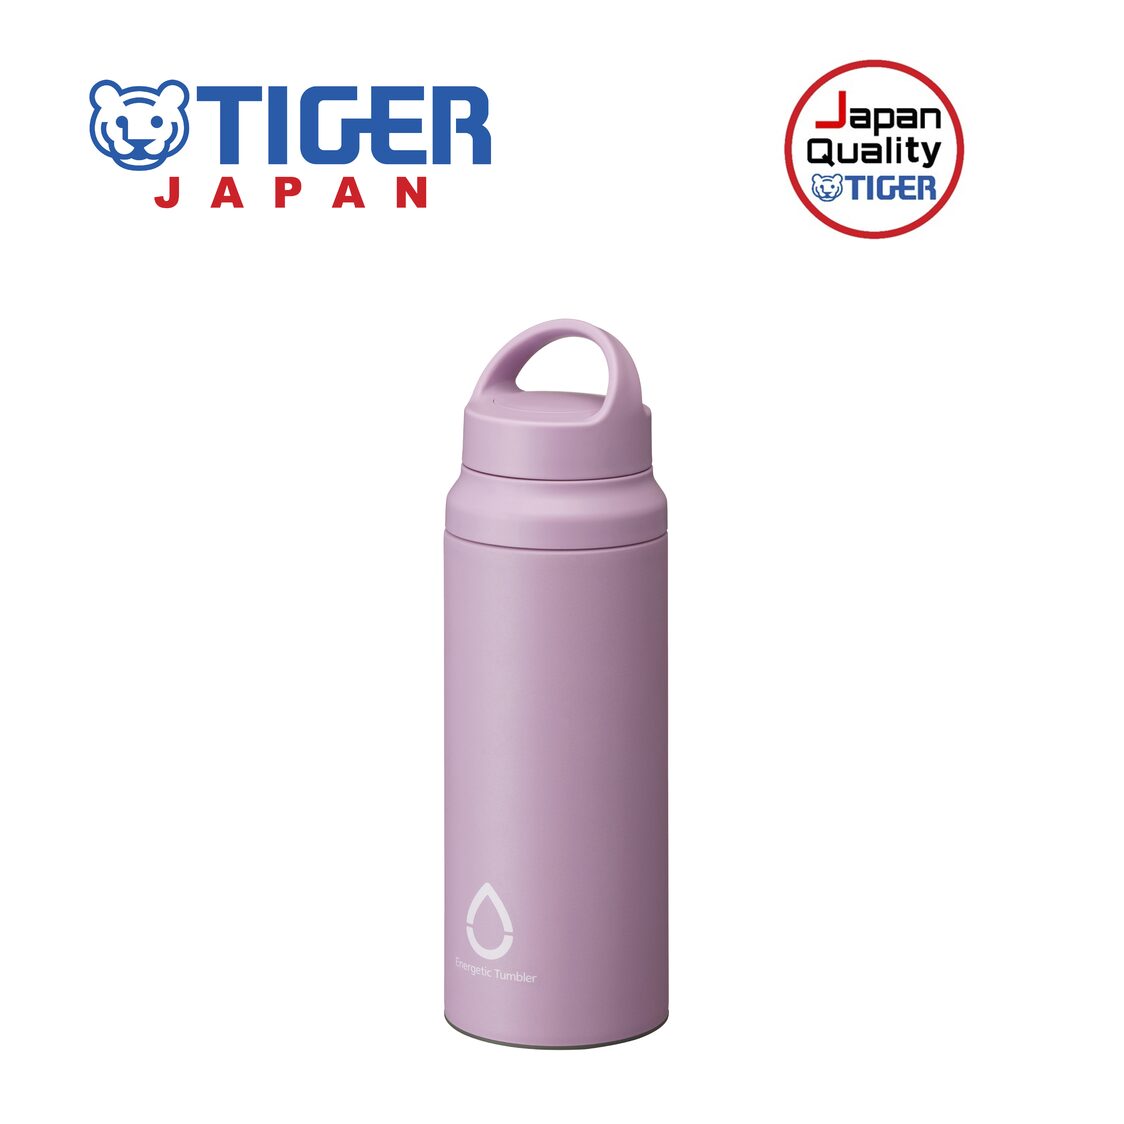 TIGER 600ml Double Stainless Steel Sport Bottle - Lilac Pink MCZ-A060 P